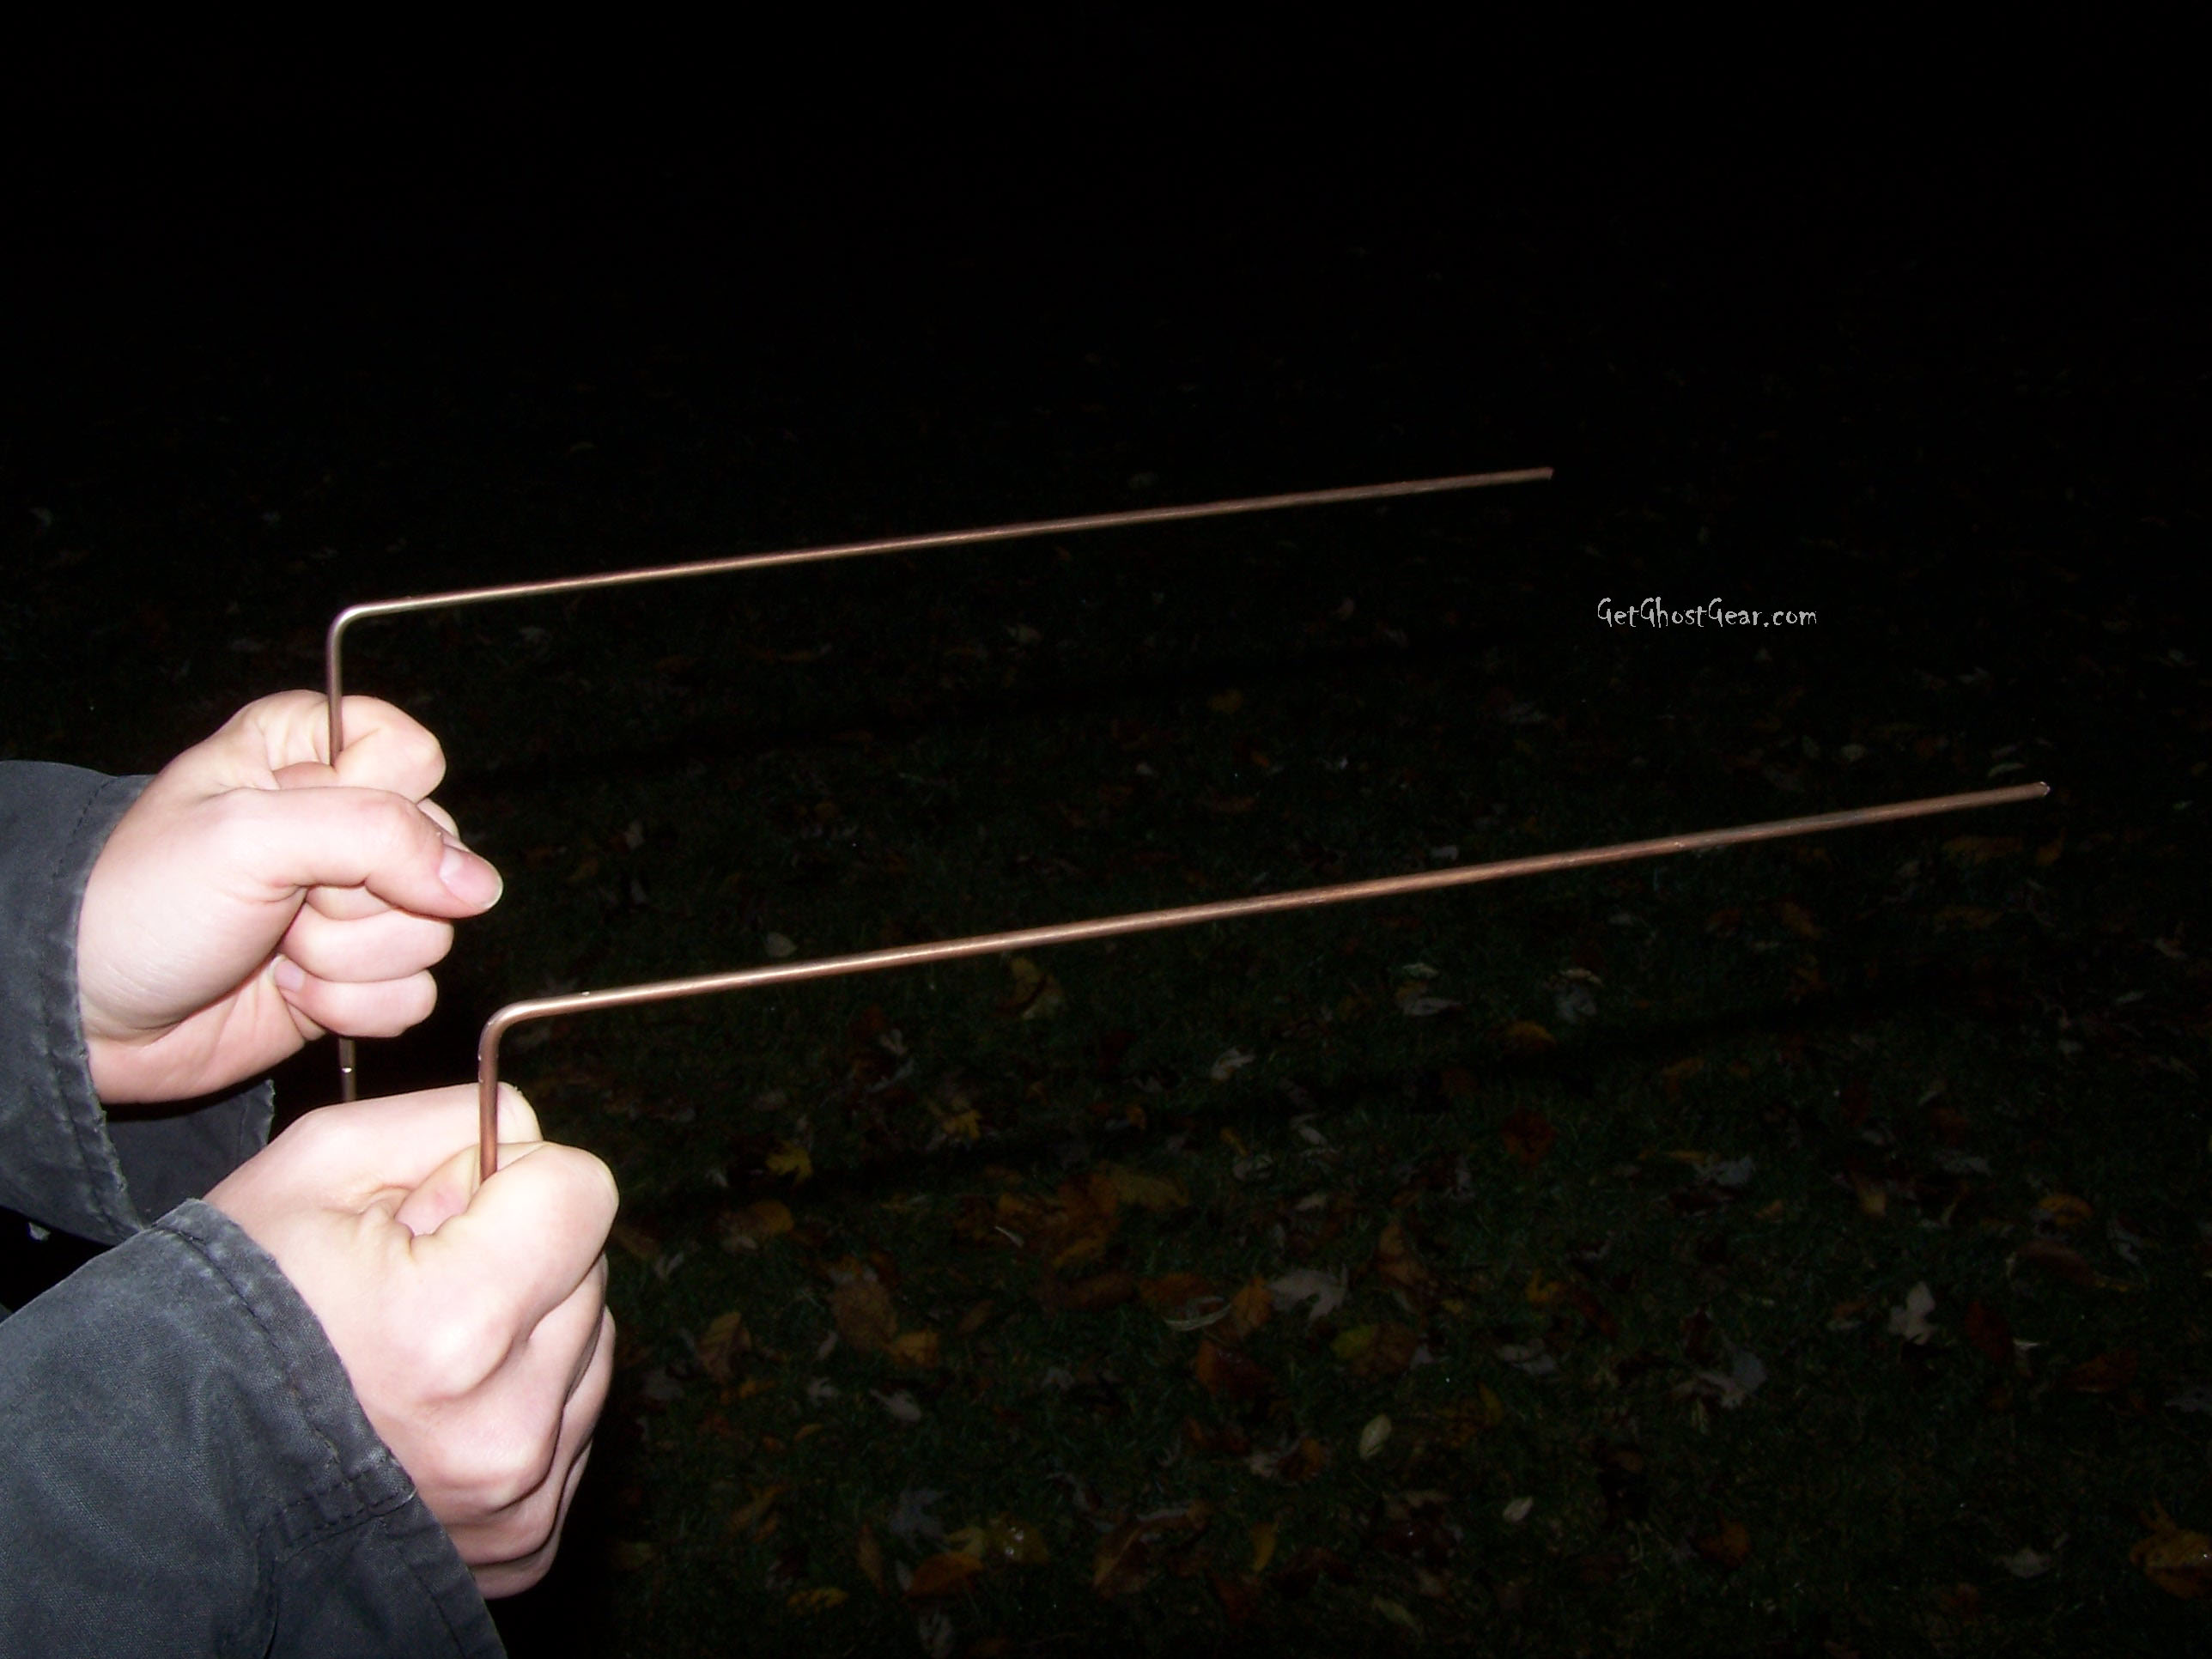 Dowsing rods used by metaphysical ghost hunters